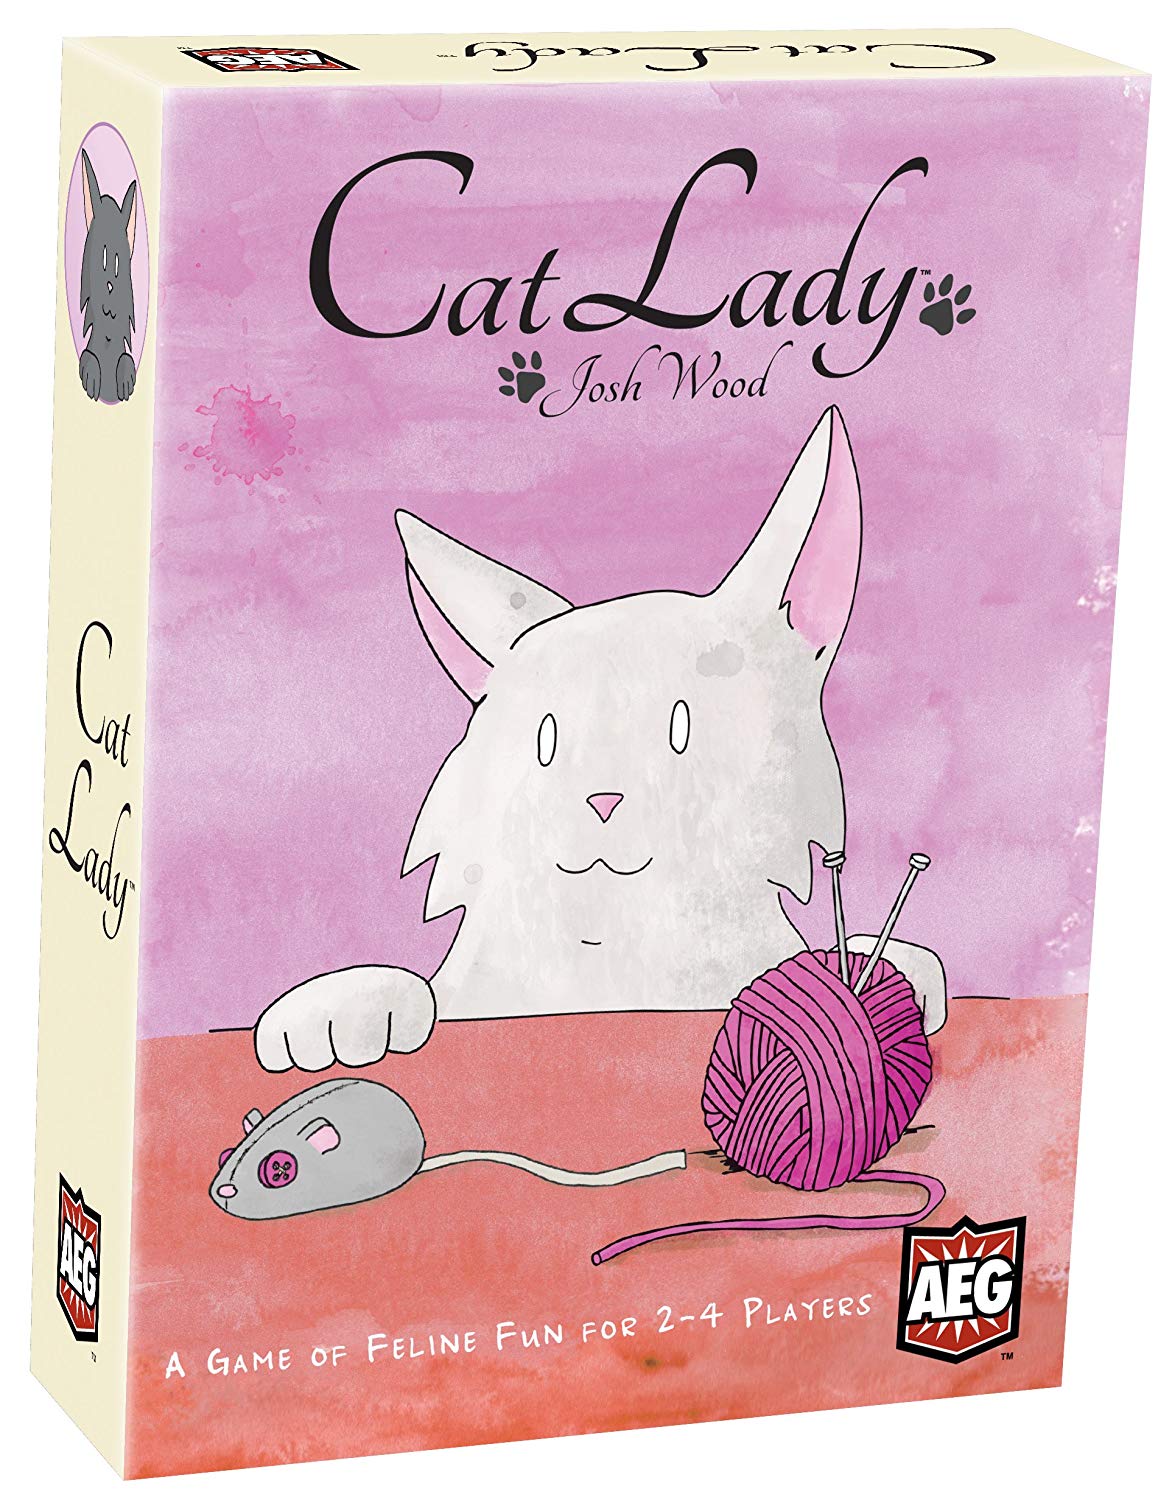 Multiplayer Card Game ‘Cat Lady’ Hits the App Store TouchArcade